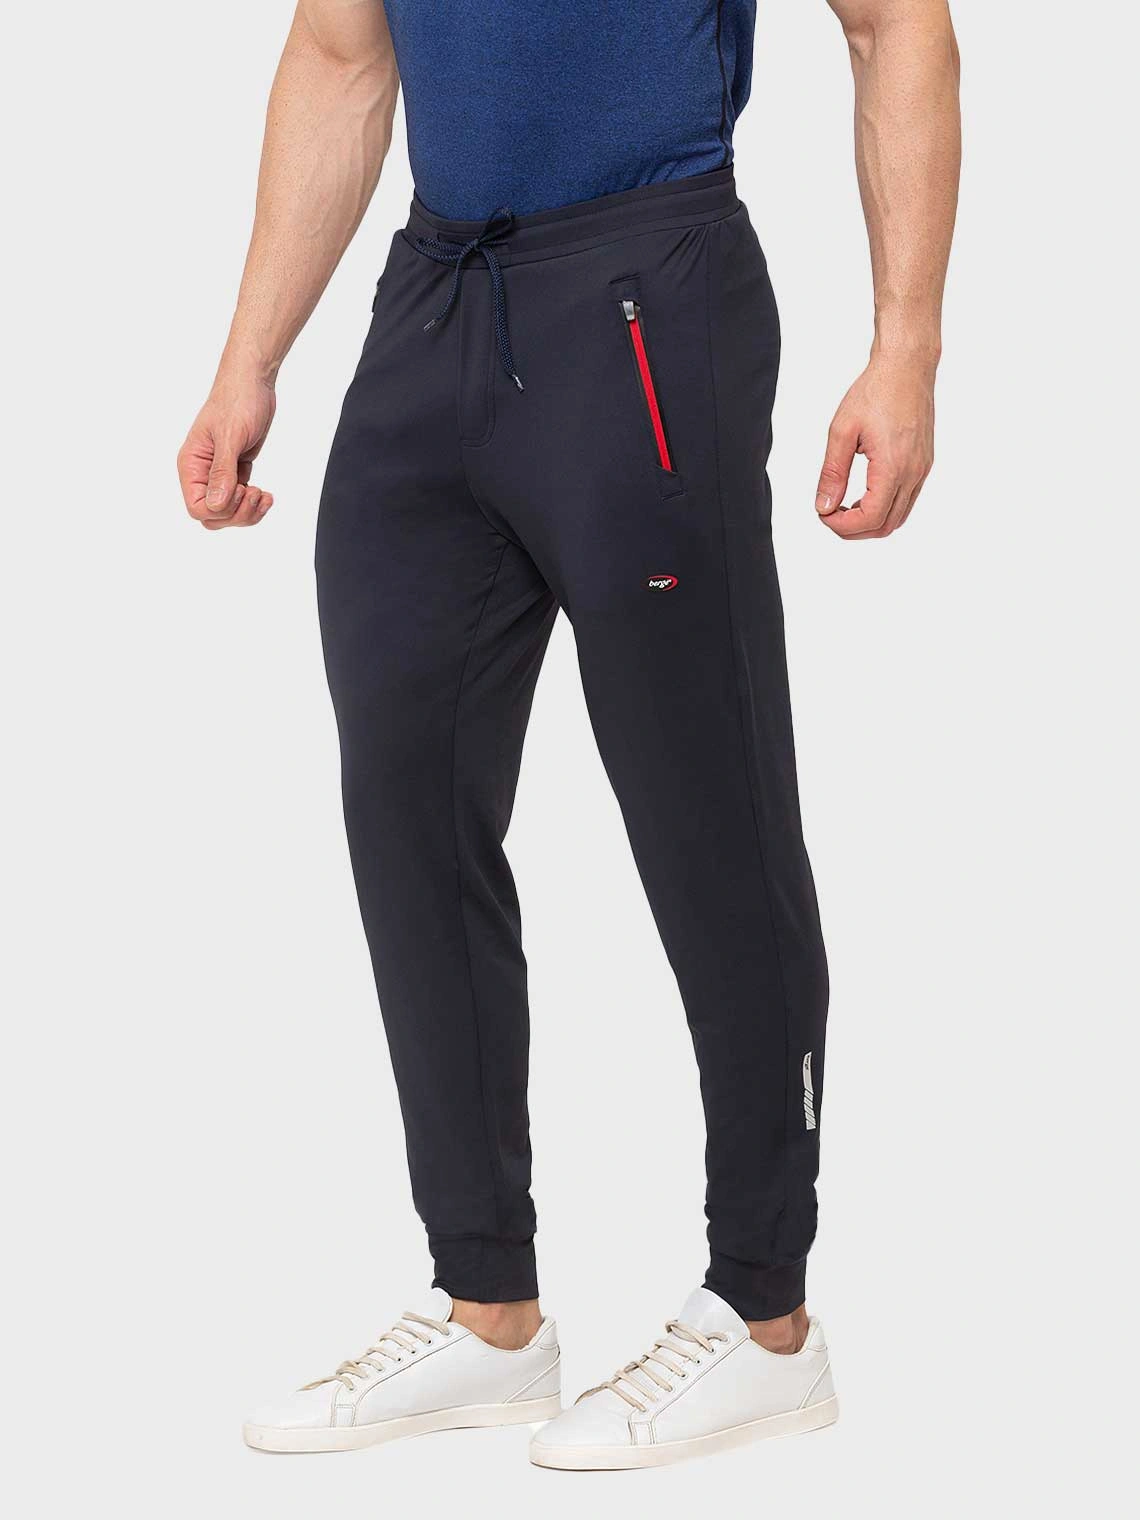 Best Sweatpants And Joggers For Men | Men's Fitness